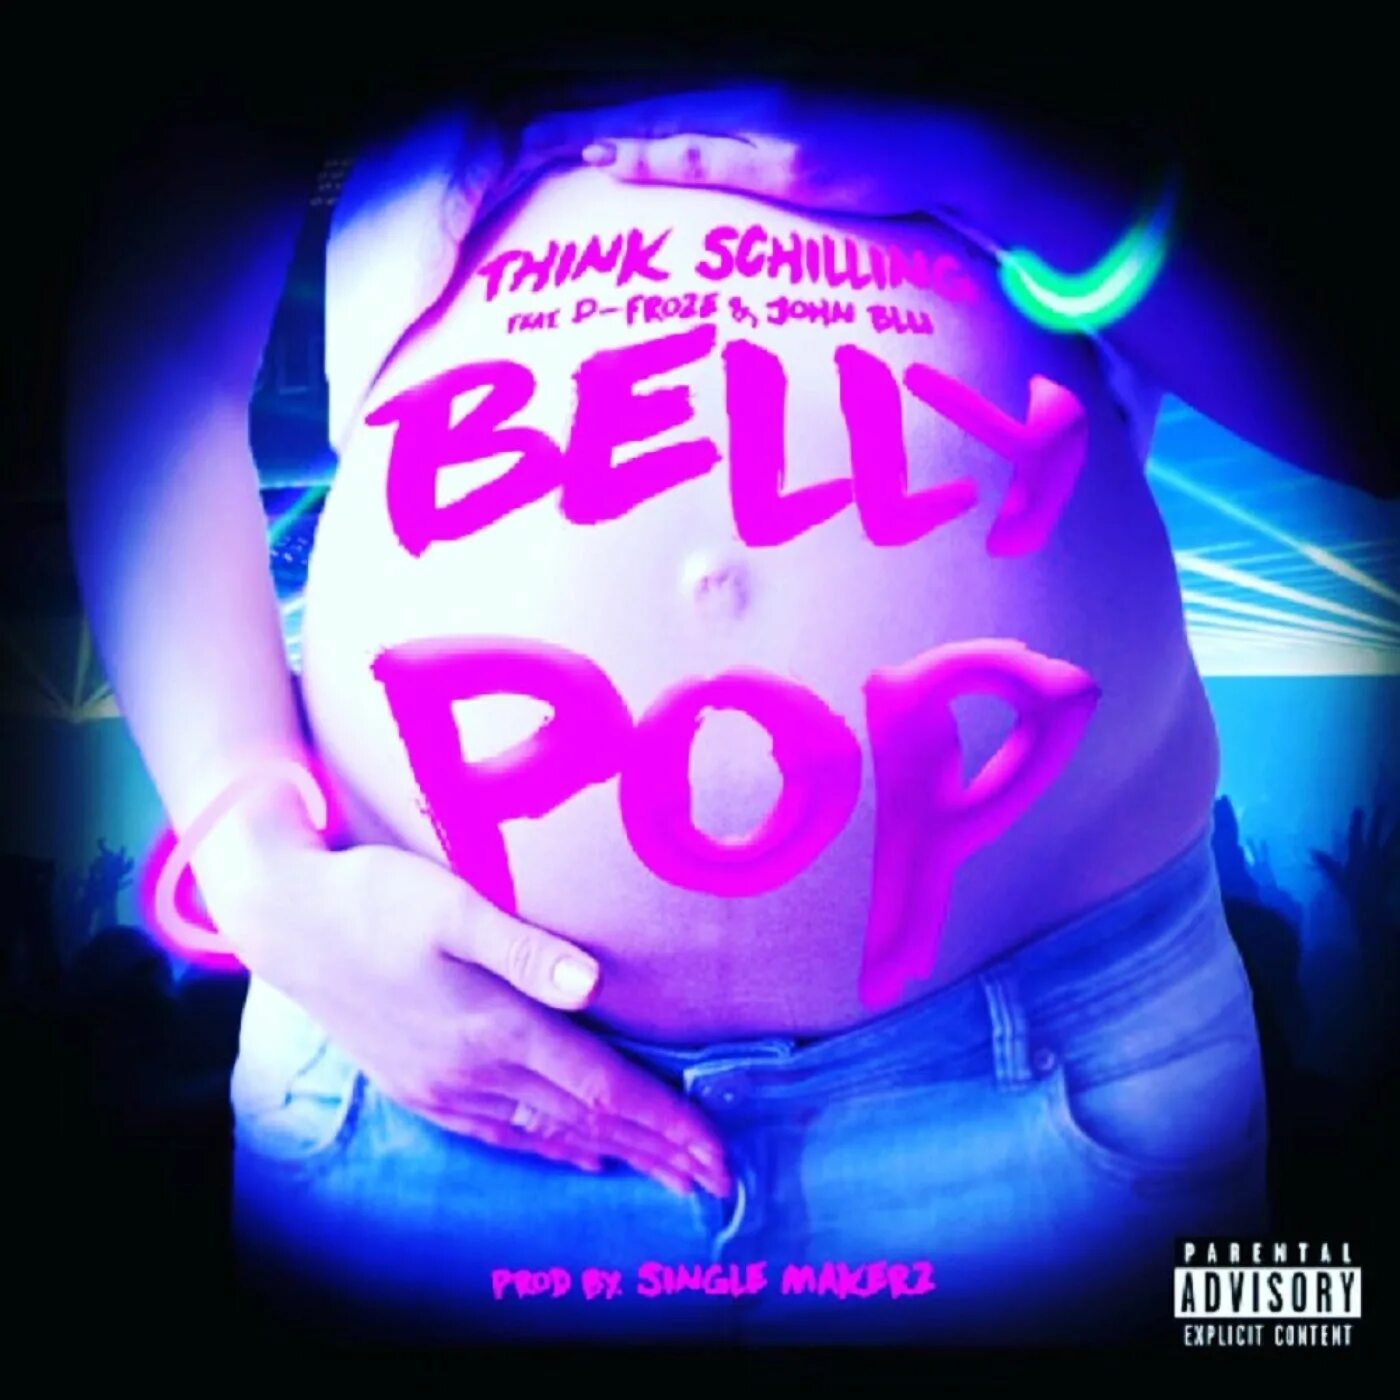 Fairy Perry belly Pop Pop.